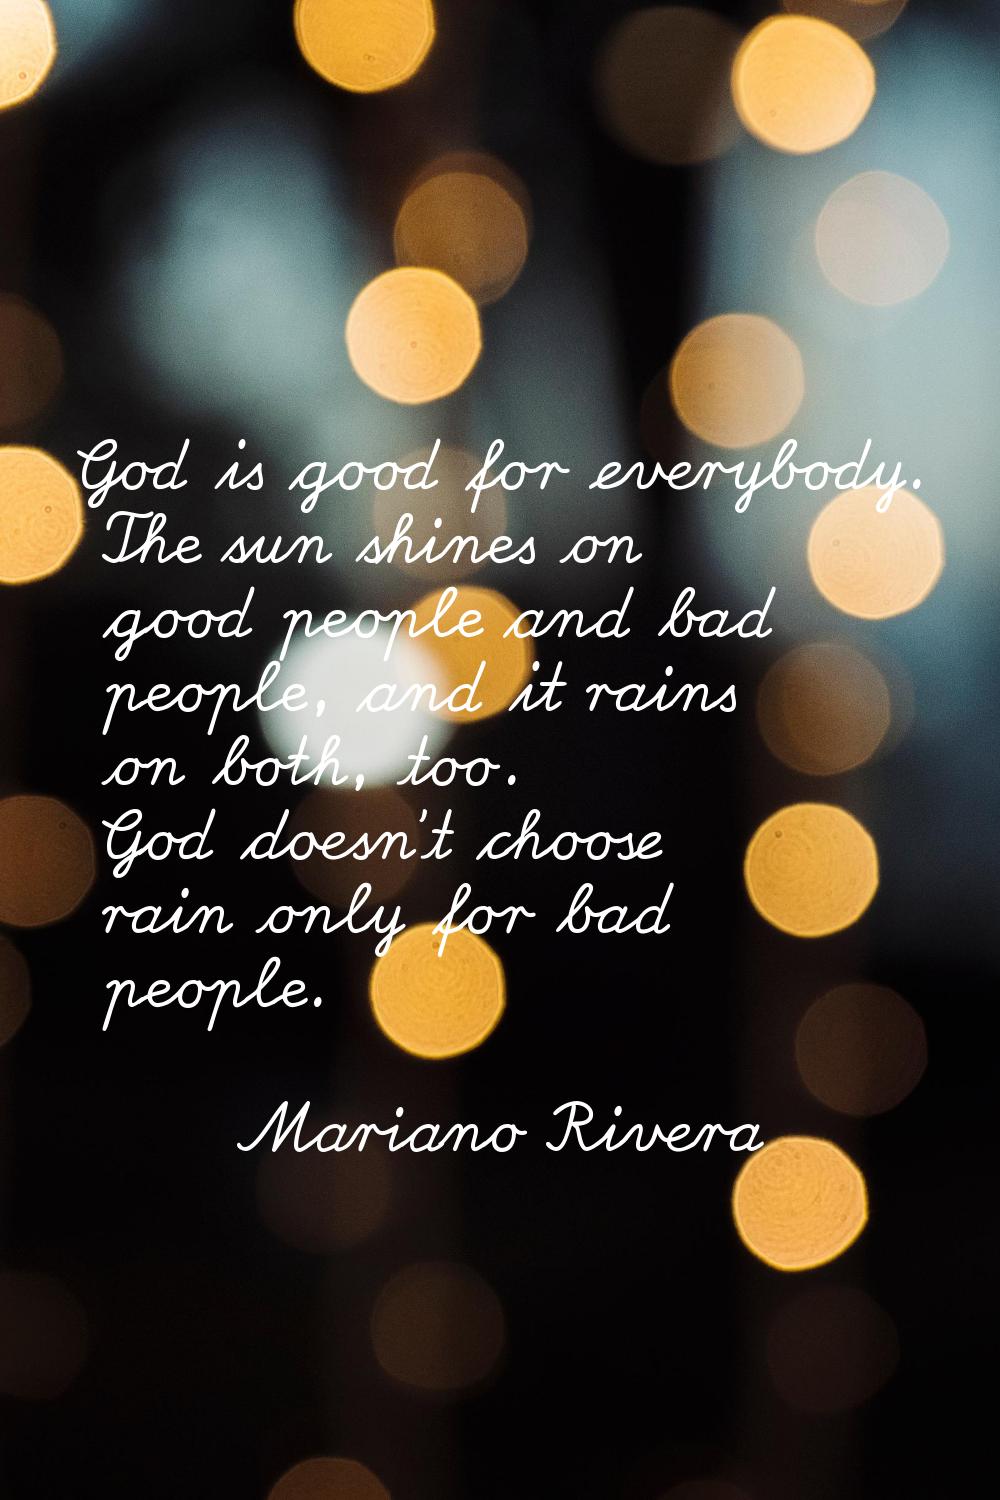 God is good for everybody. The sun shines on good people and bad people, and it rains on both, too.